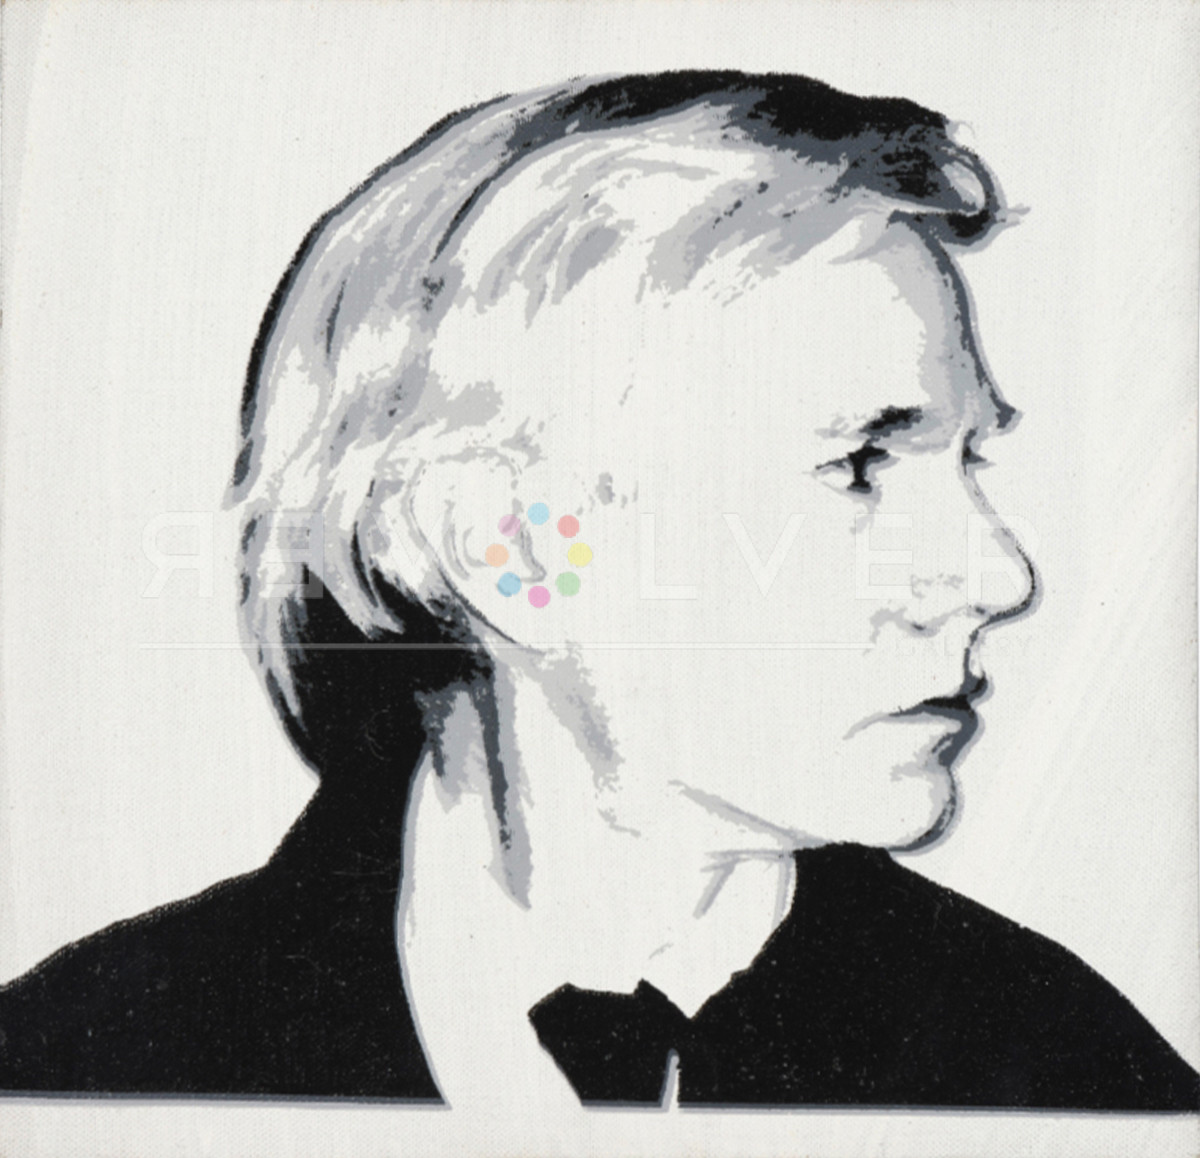 Self-Portrait (Painting) by Andy Warhol